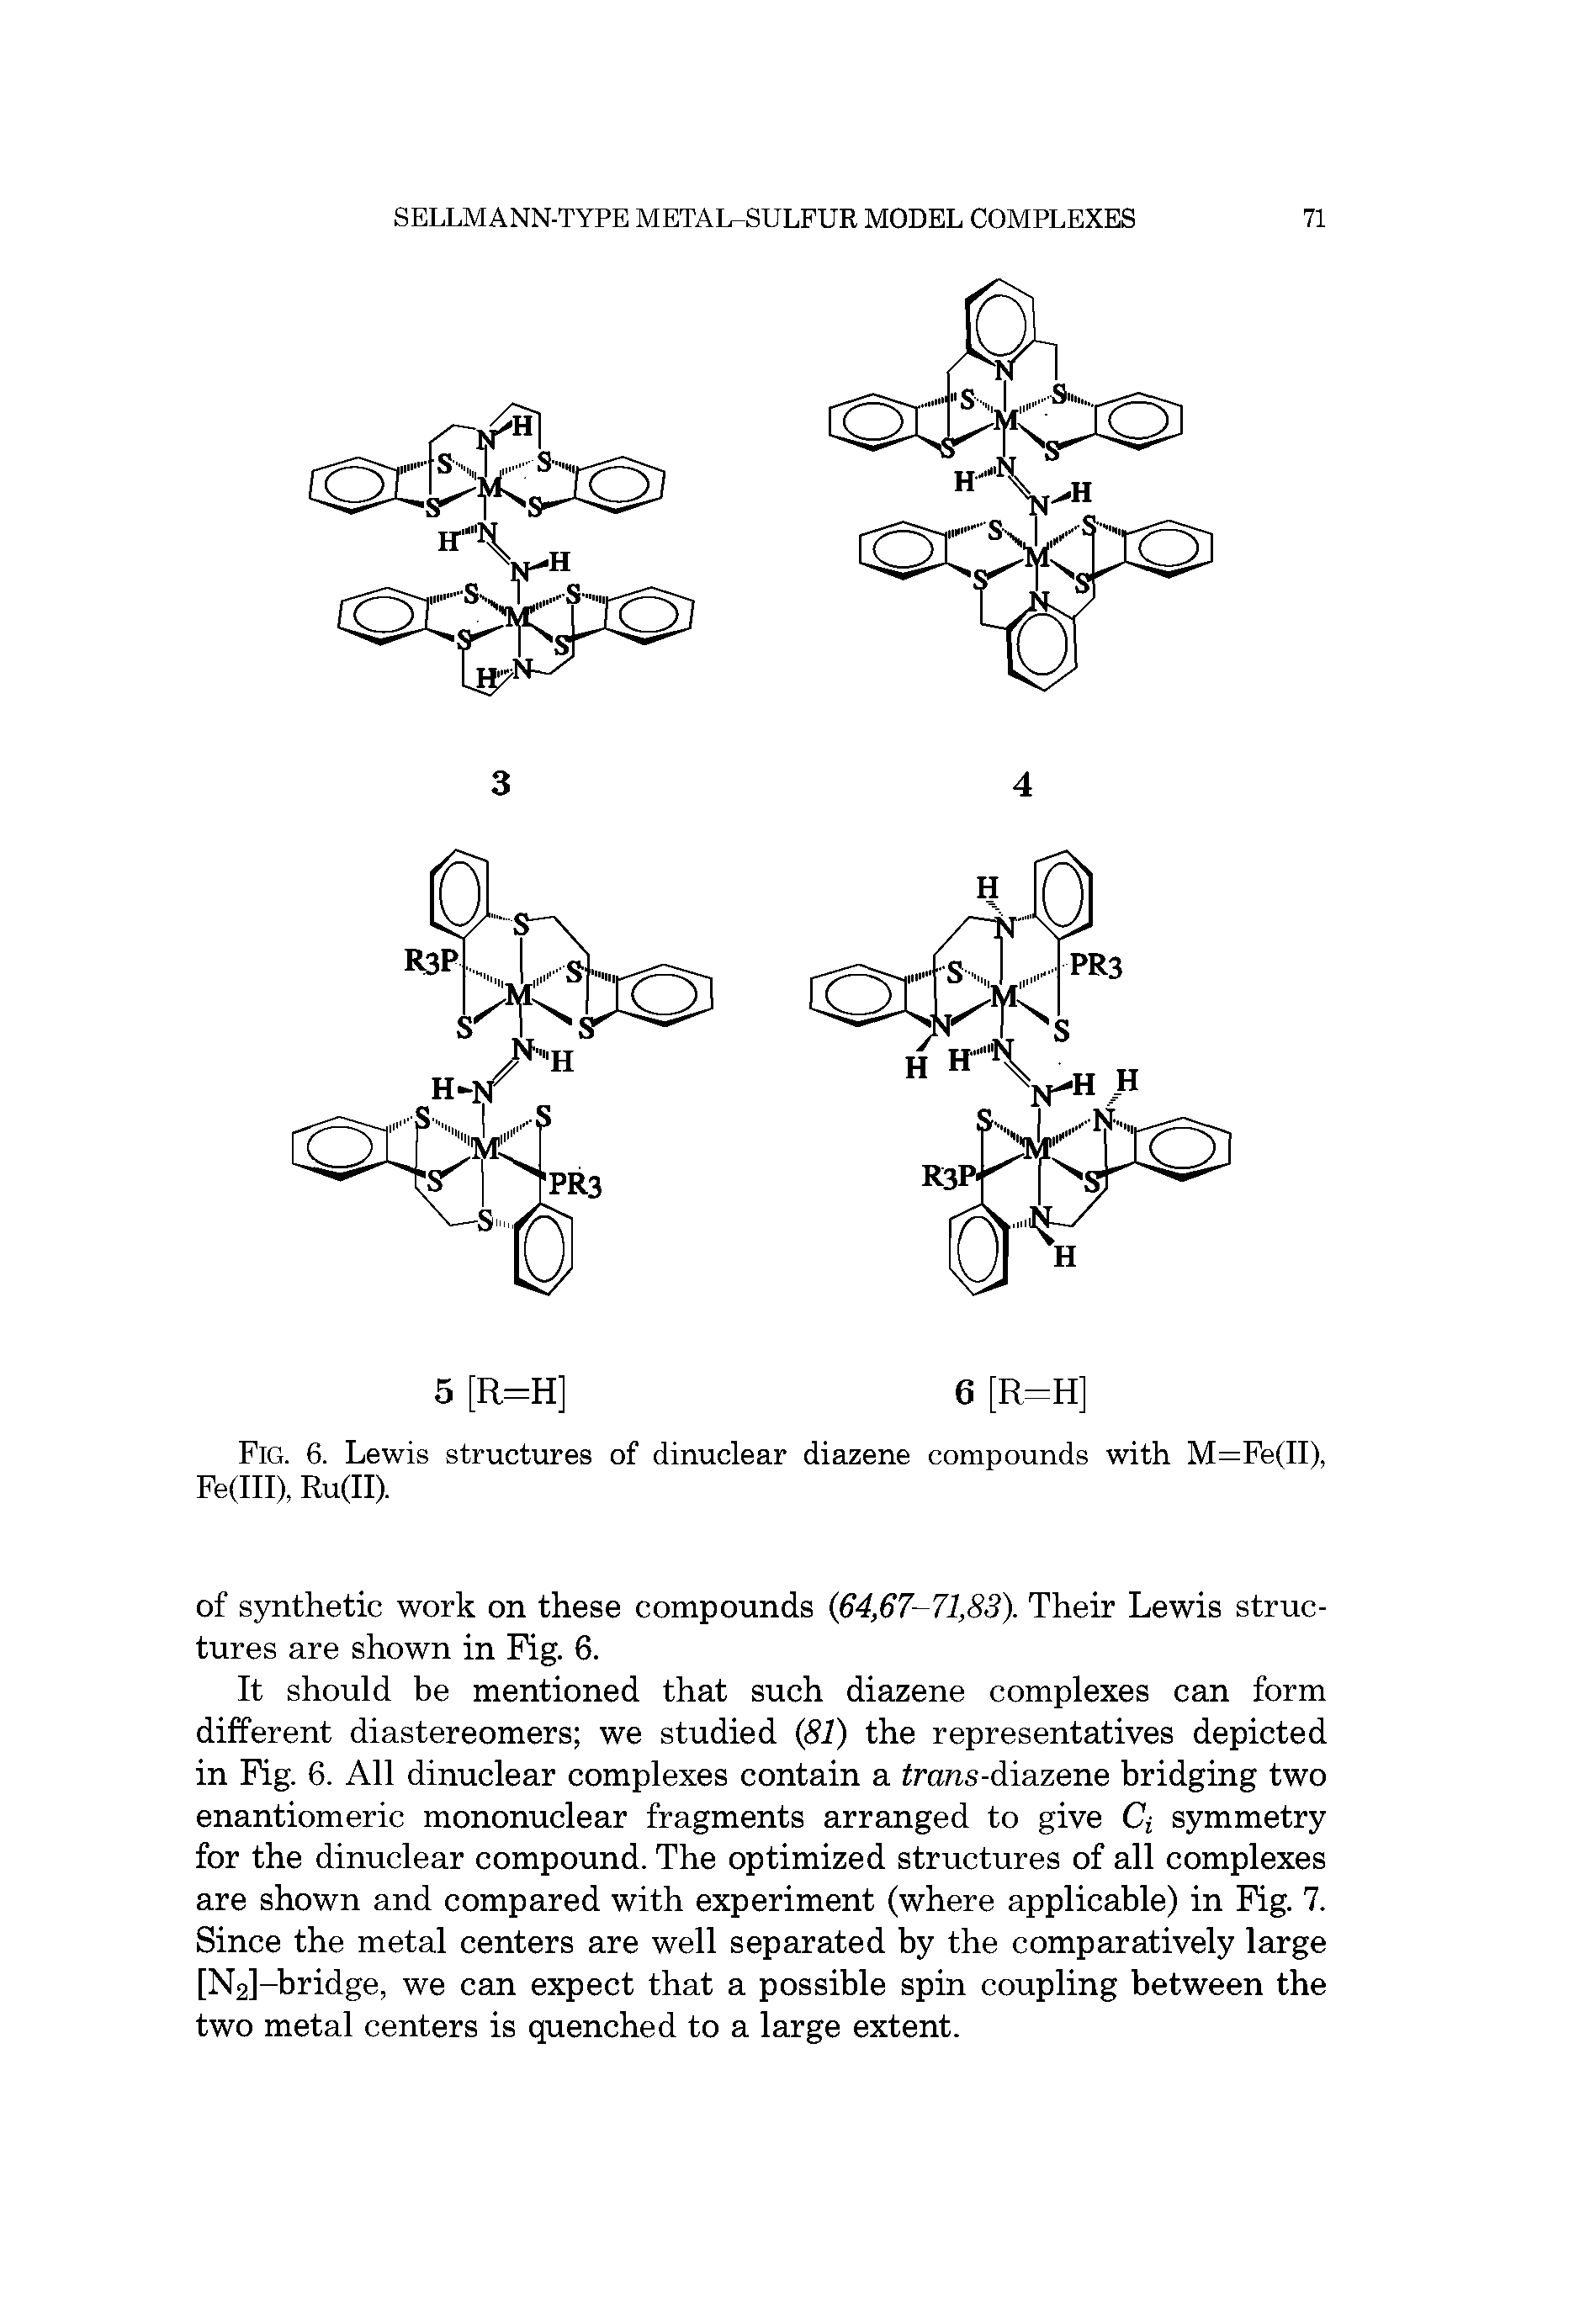 Fig. 6. Lewis structures of dinuclear diazene compounds with M=Fe(II), Fe(III), Ru(II).